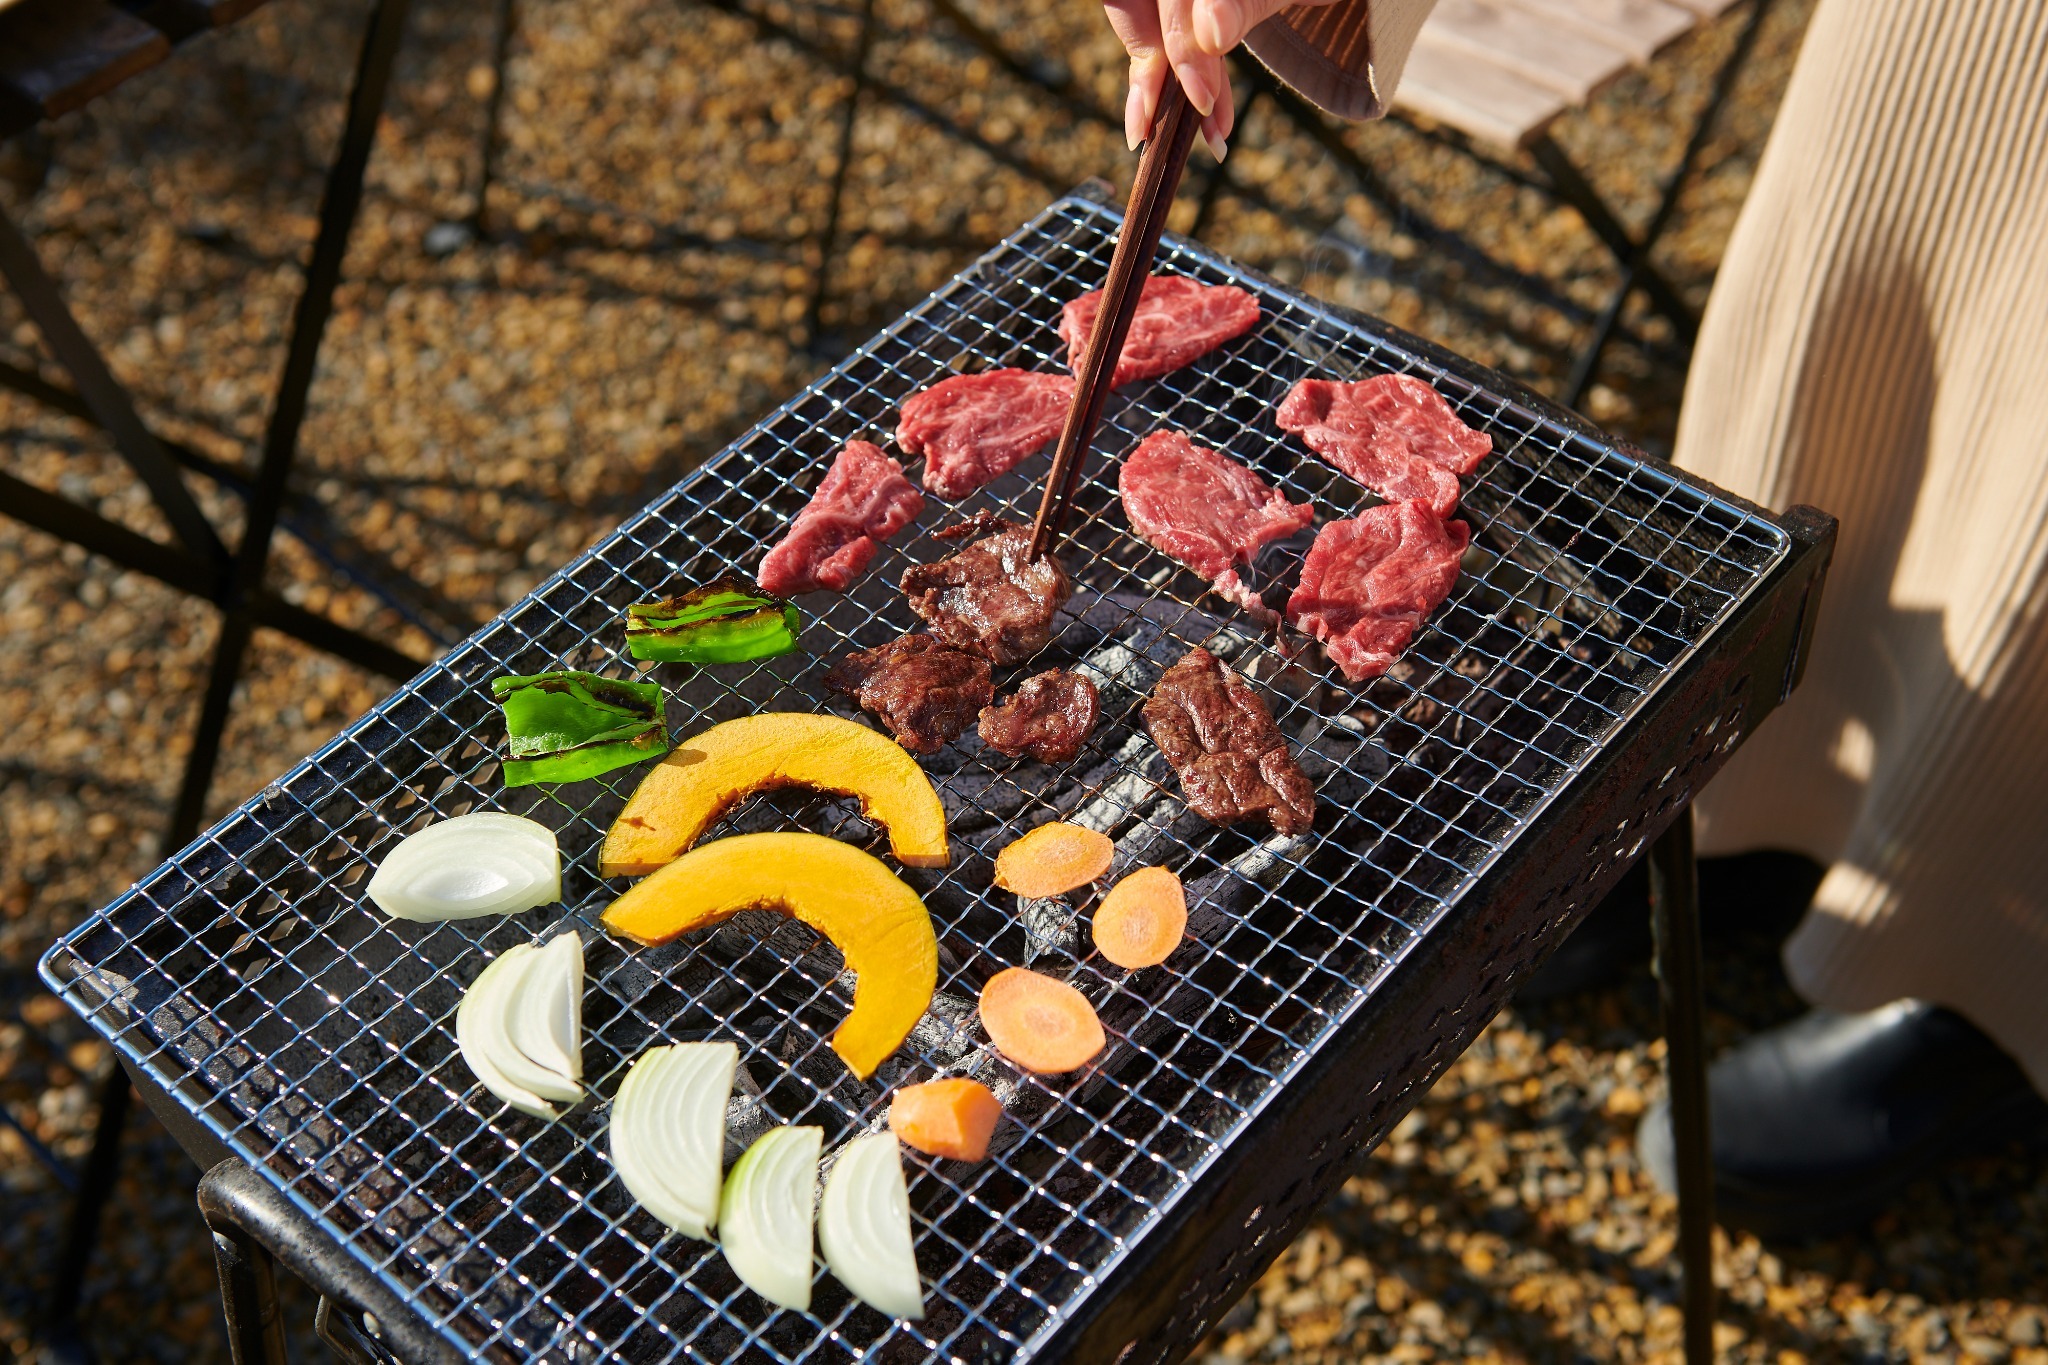 You can enjoy barbecuing in front of the house. We can provide barbecue tools for a fee. However, please finish by 21:00 which might inconvenience the neighborhood. 家の前でバーベキューなどもお楽しみ頂けます。道具の貸し出し(有料)も行っておりますのまた、近隣の迷惑にならないように21時まででお願いいたします。